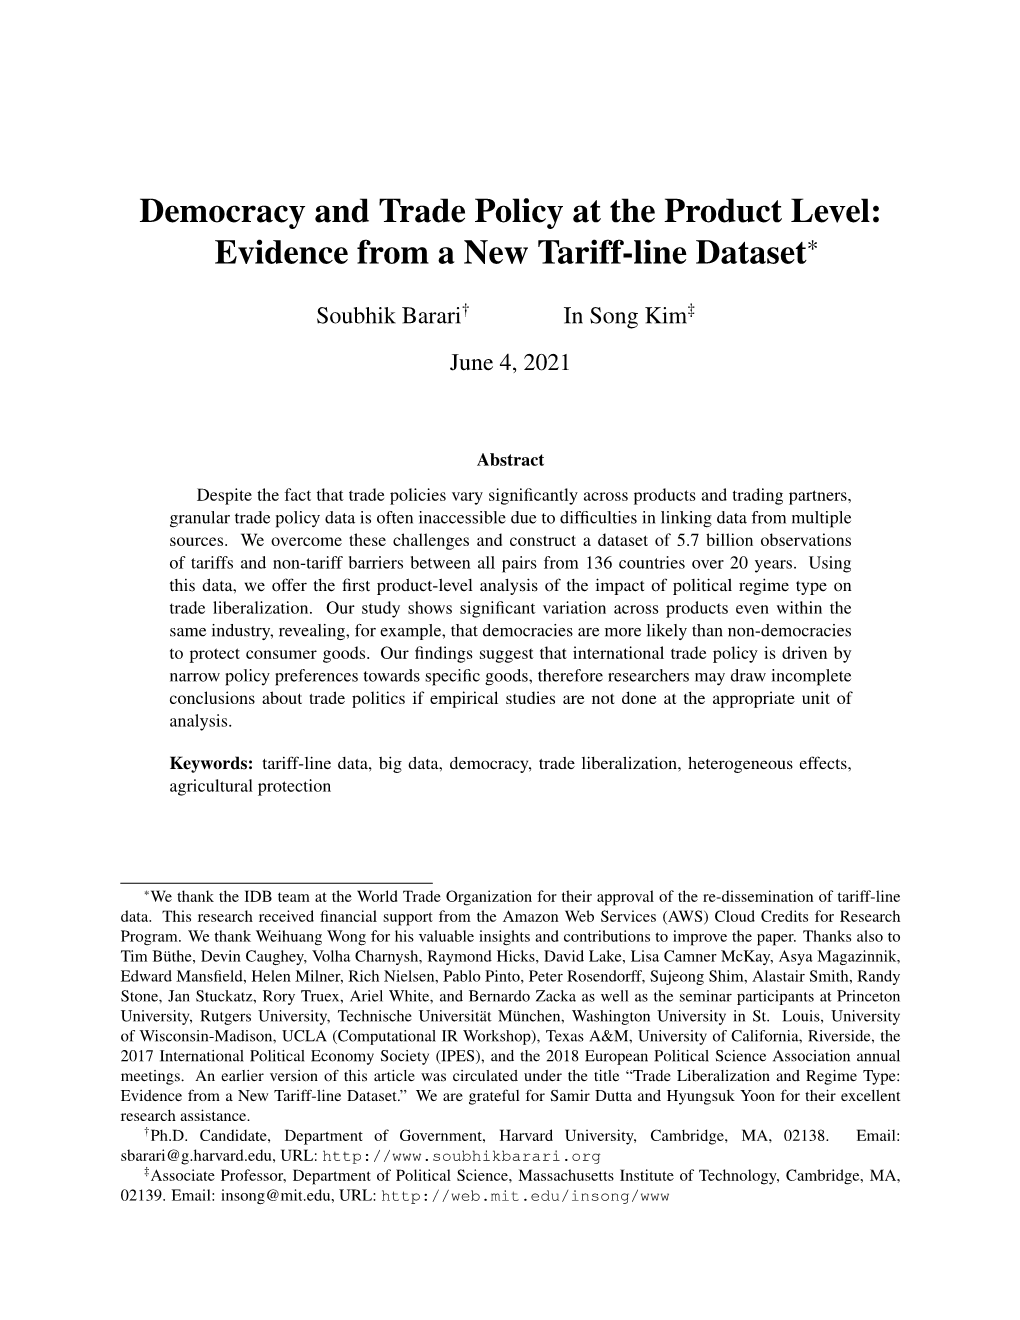 Democracy and Trade Policy at the Product Level: Evidence from a New Tariff-Line Dataset*